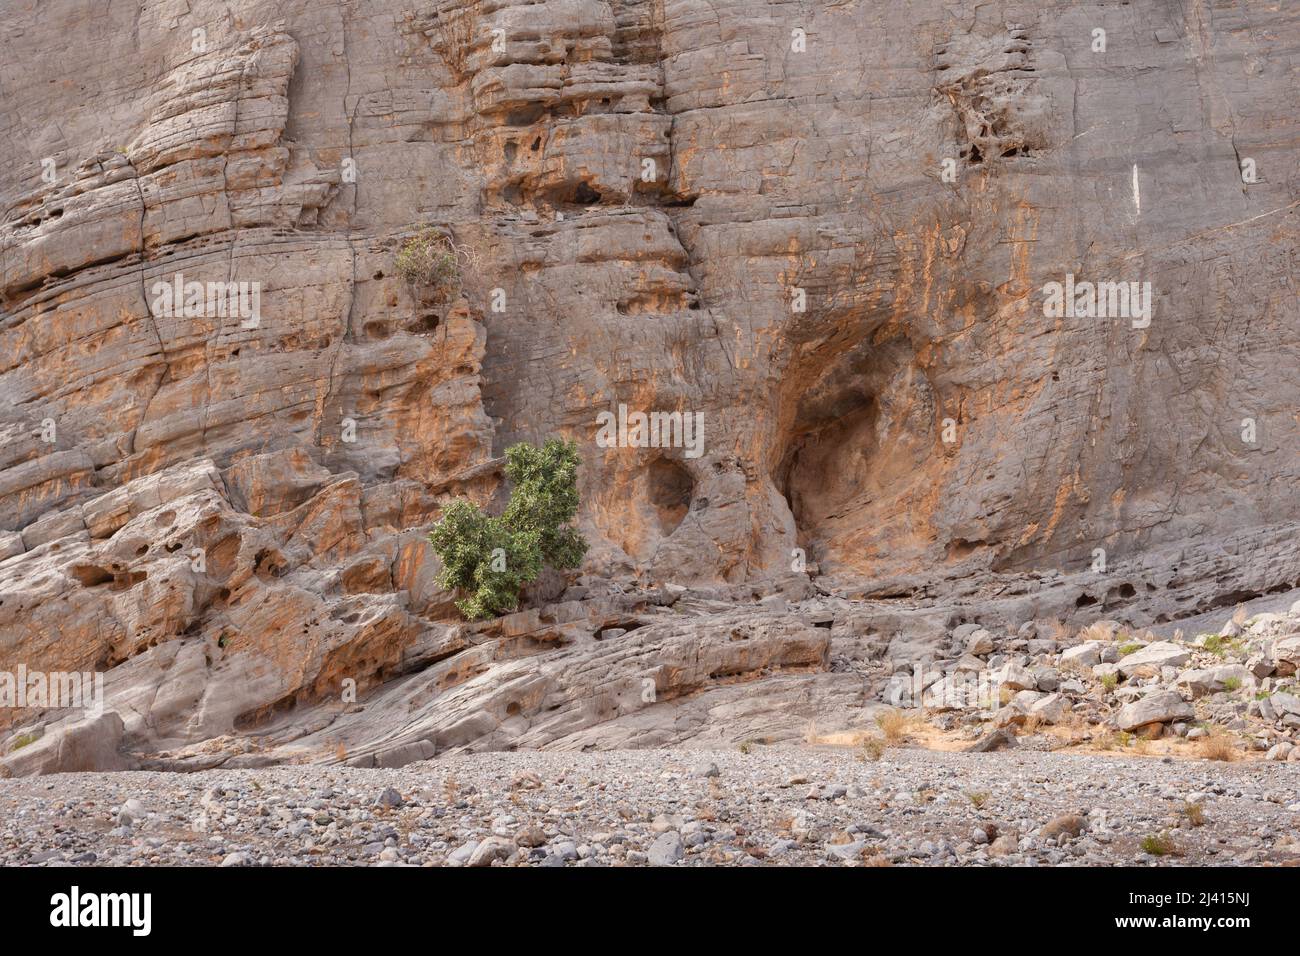 Rock formations in a wadi in the desert of the Emirate of Ras al Khaimah in the United Arab Emirates. Stock Photo